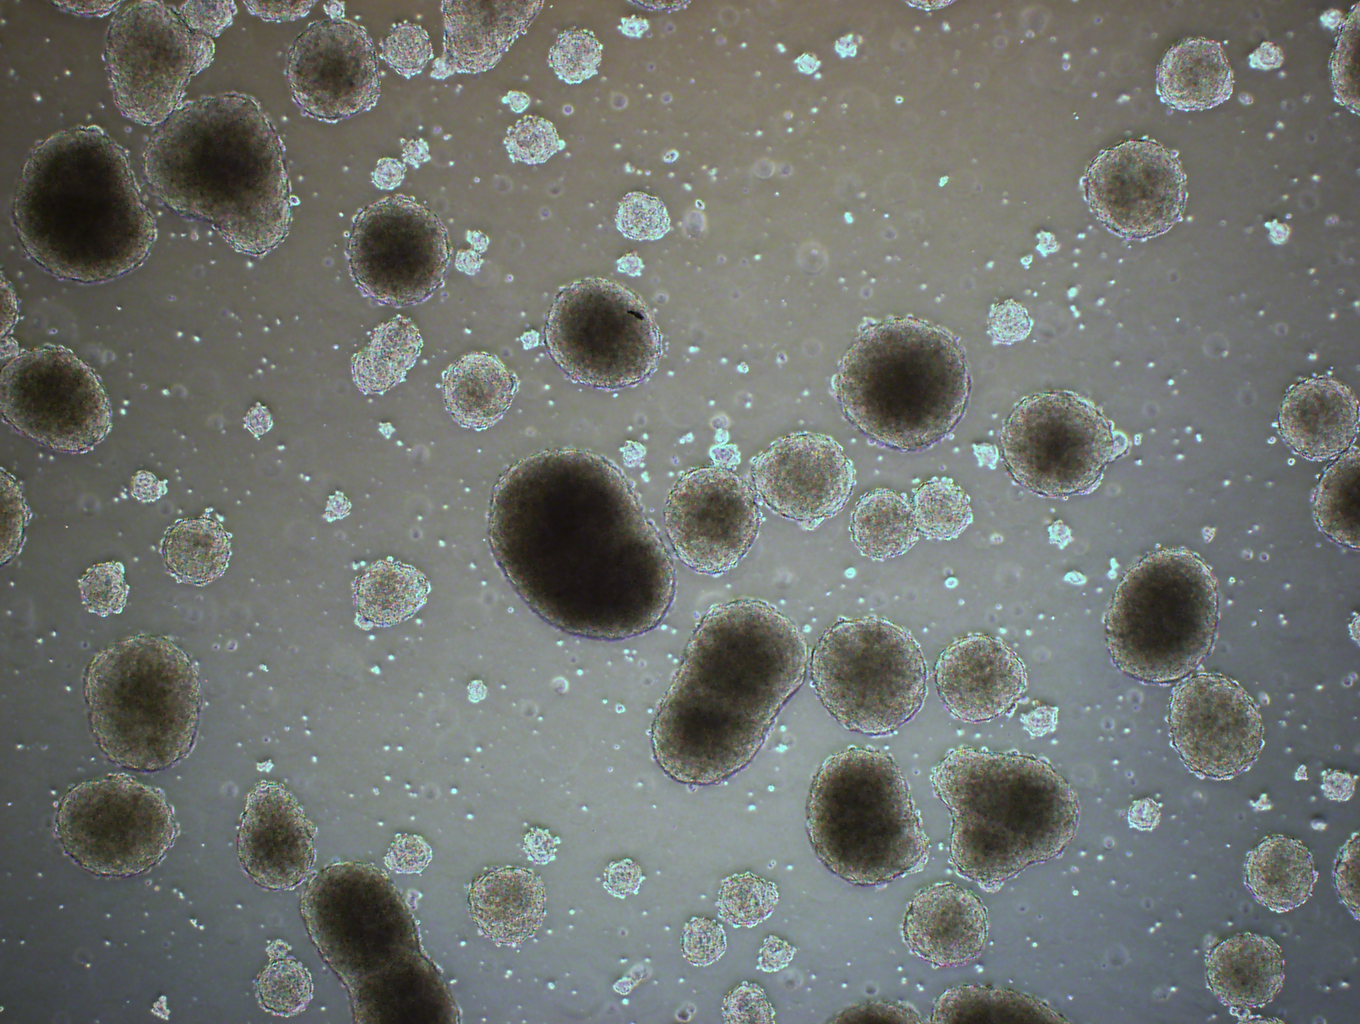 A scattering of brown-colored cells in a variety of sizes.